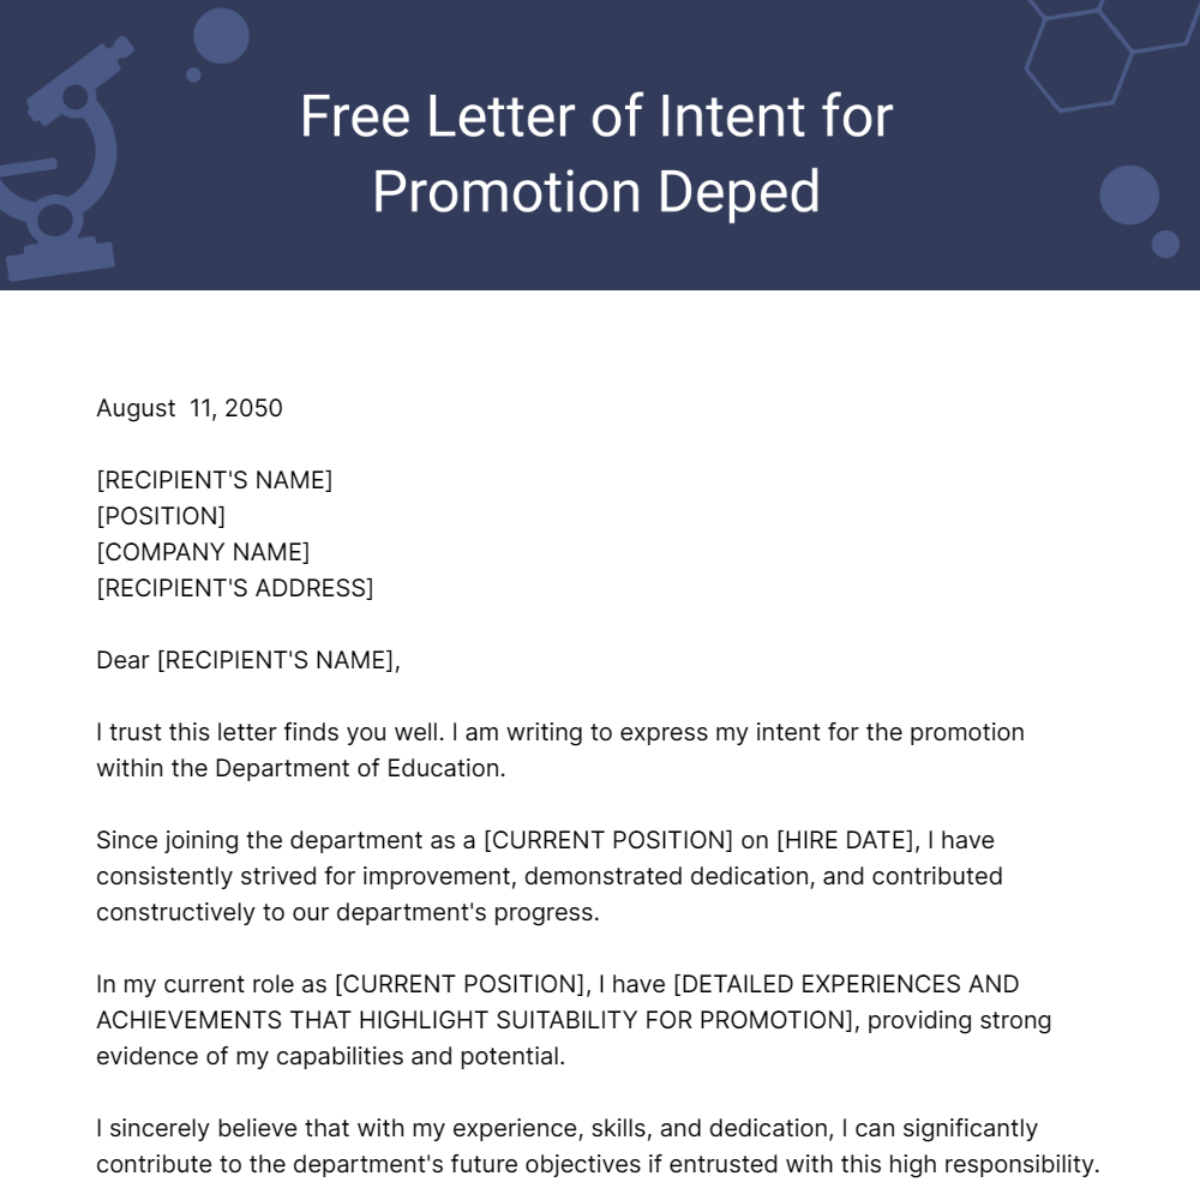 Letter of Intent for Promotion Deped Template